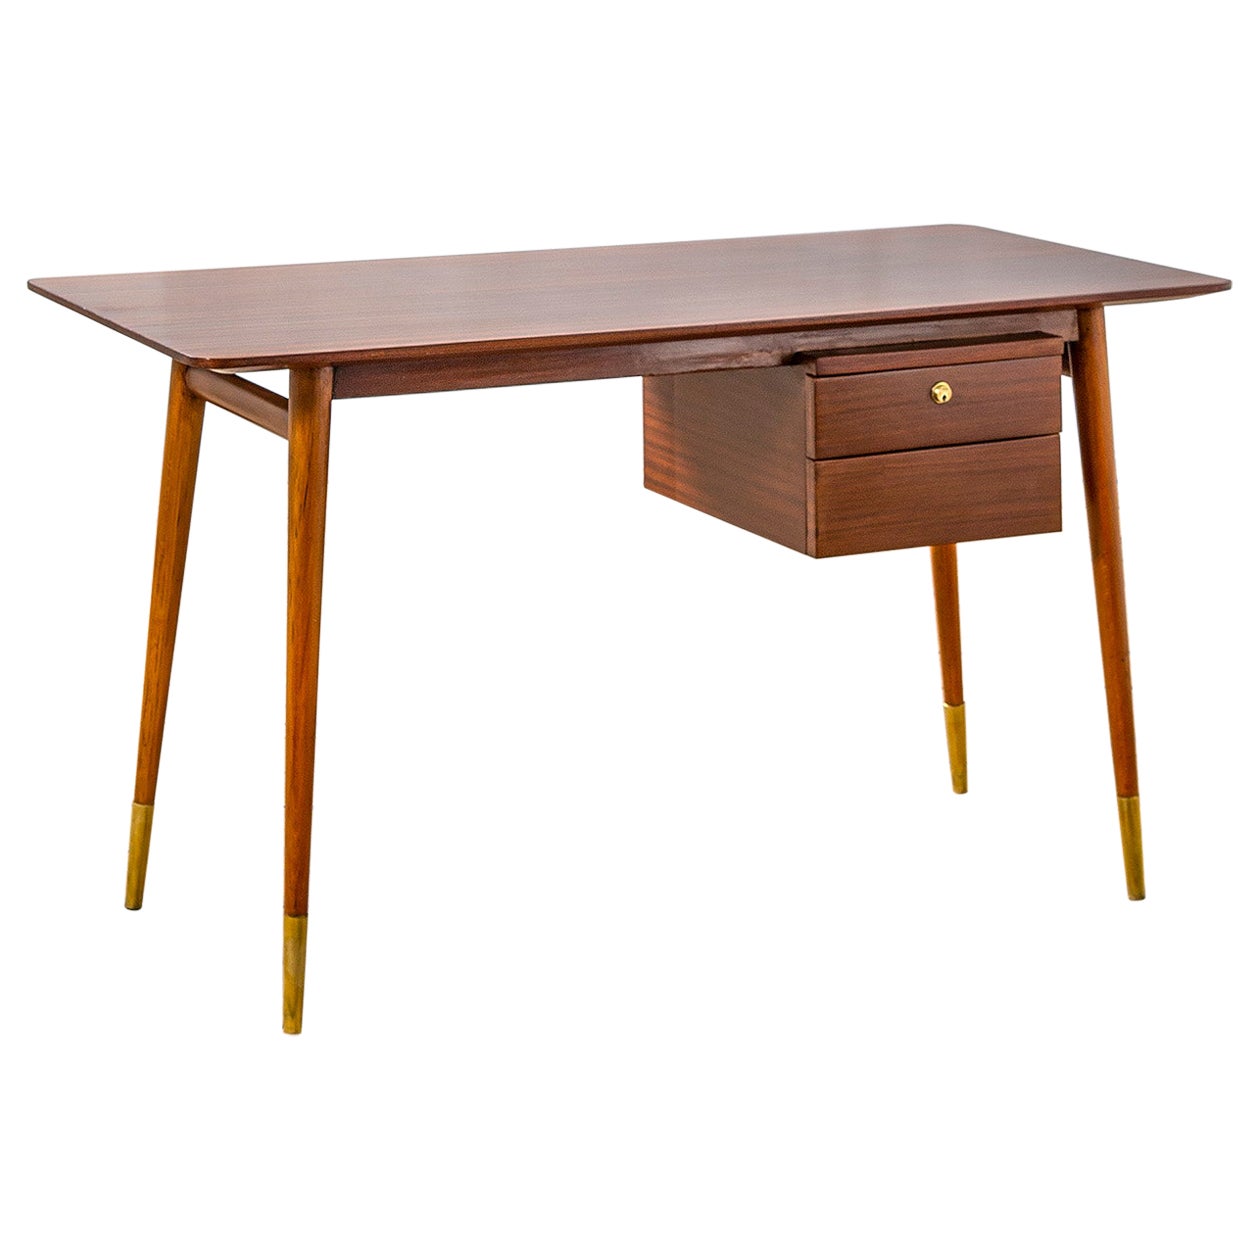 20th Century Melchiorre Bega Desk with wooden structure, drawers Brass details For Sale